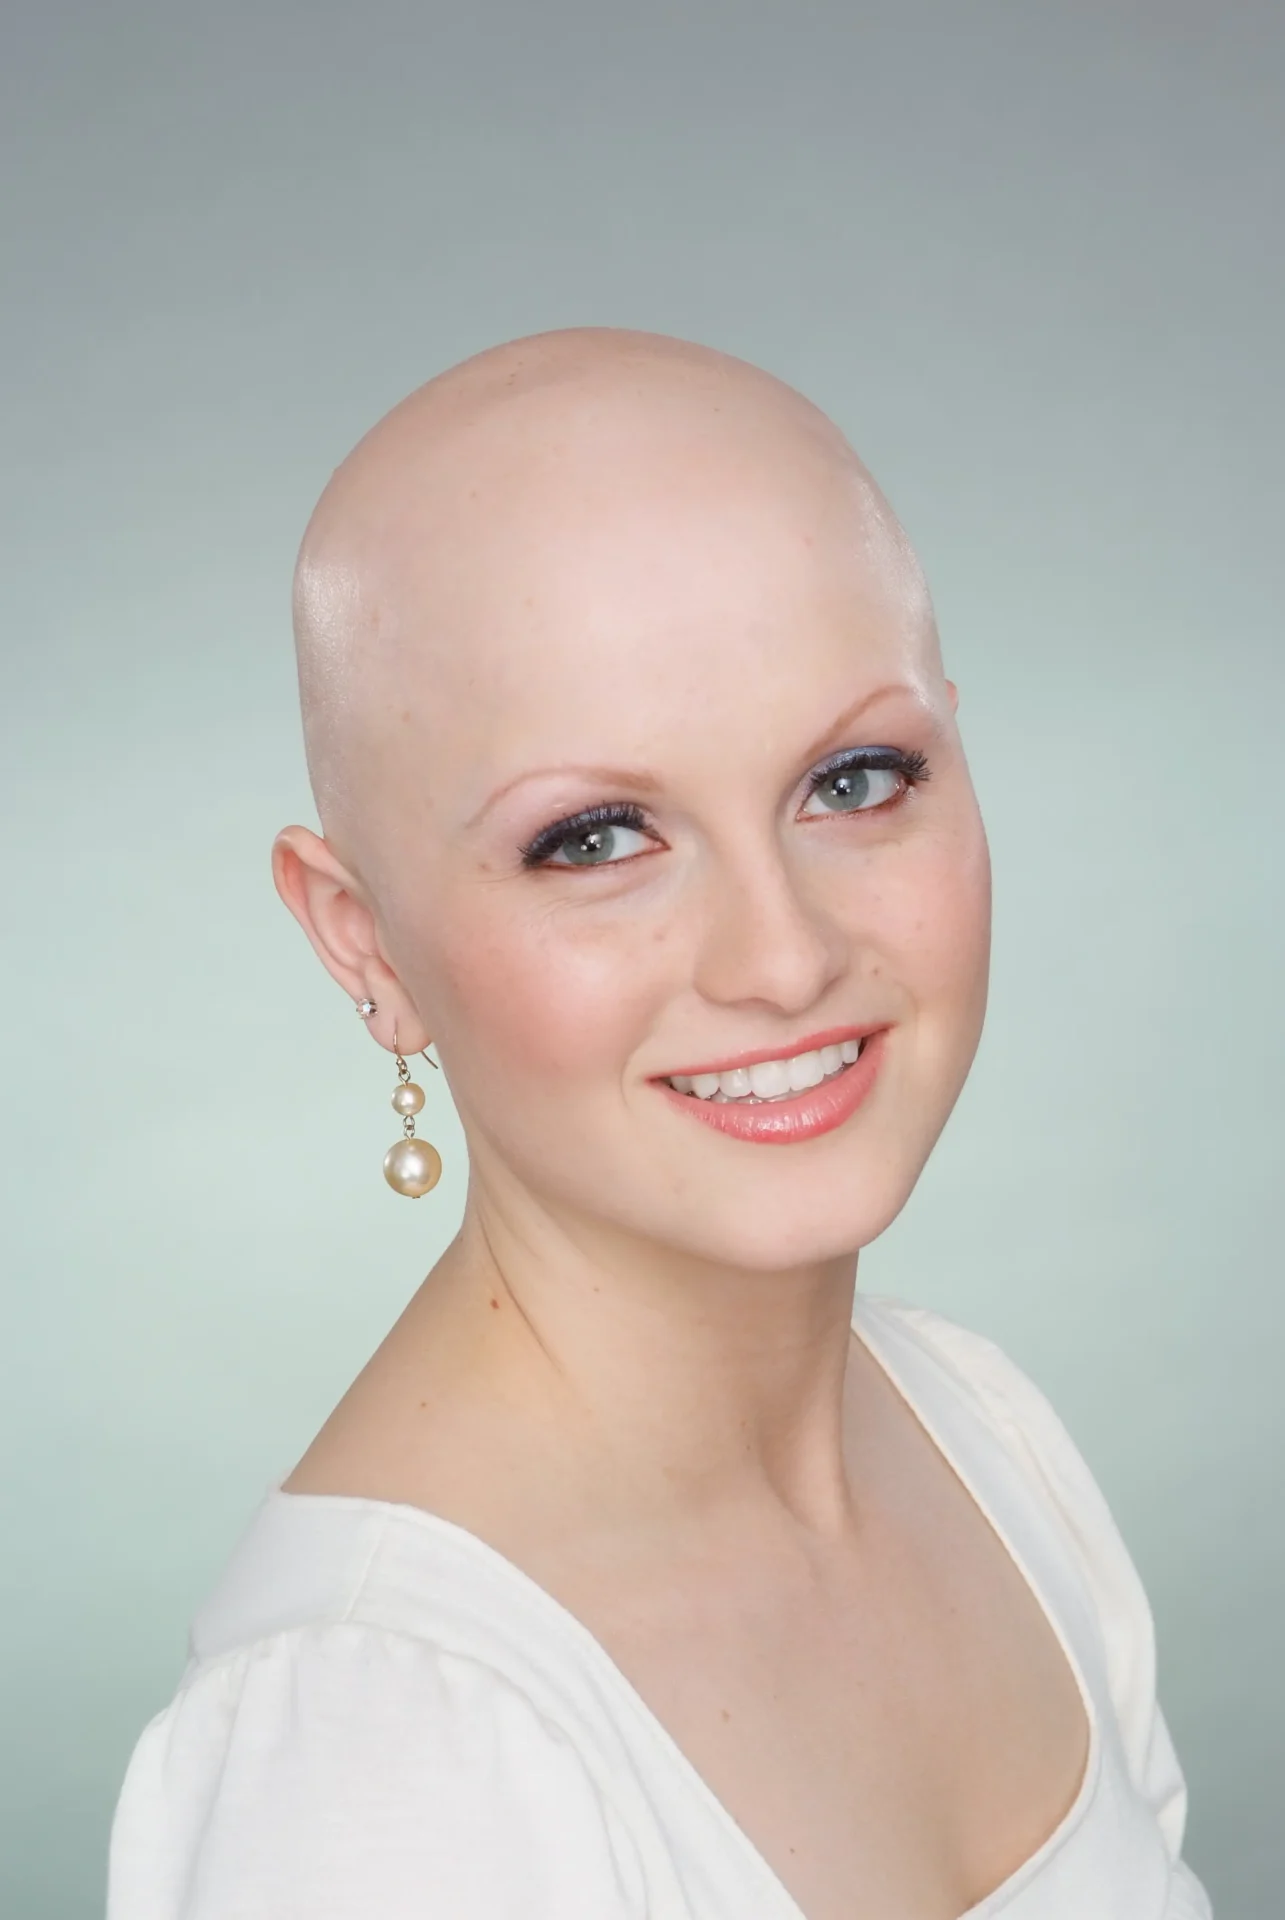 A Woman With Bald Head in a White Color Top